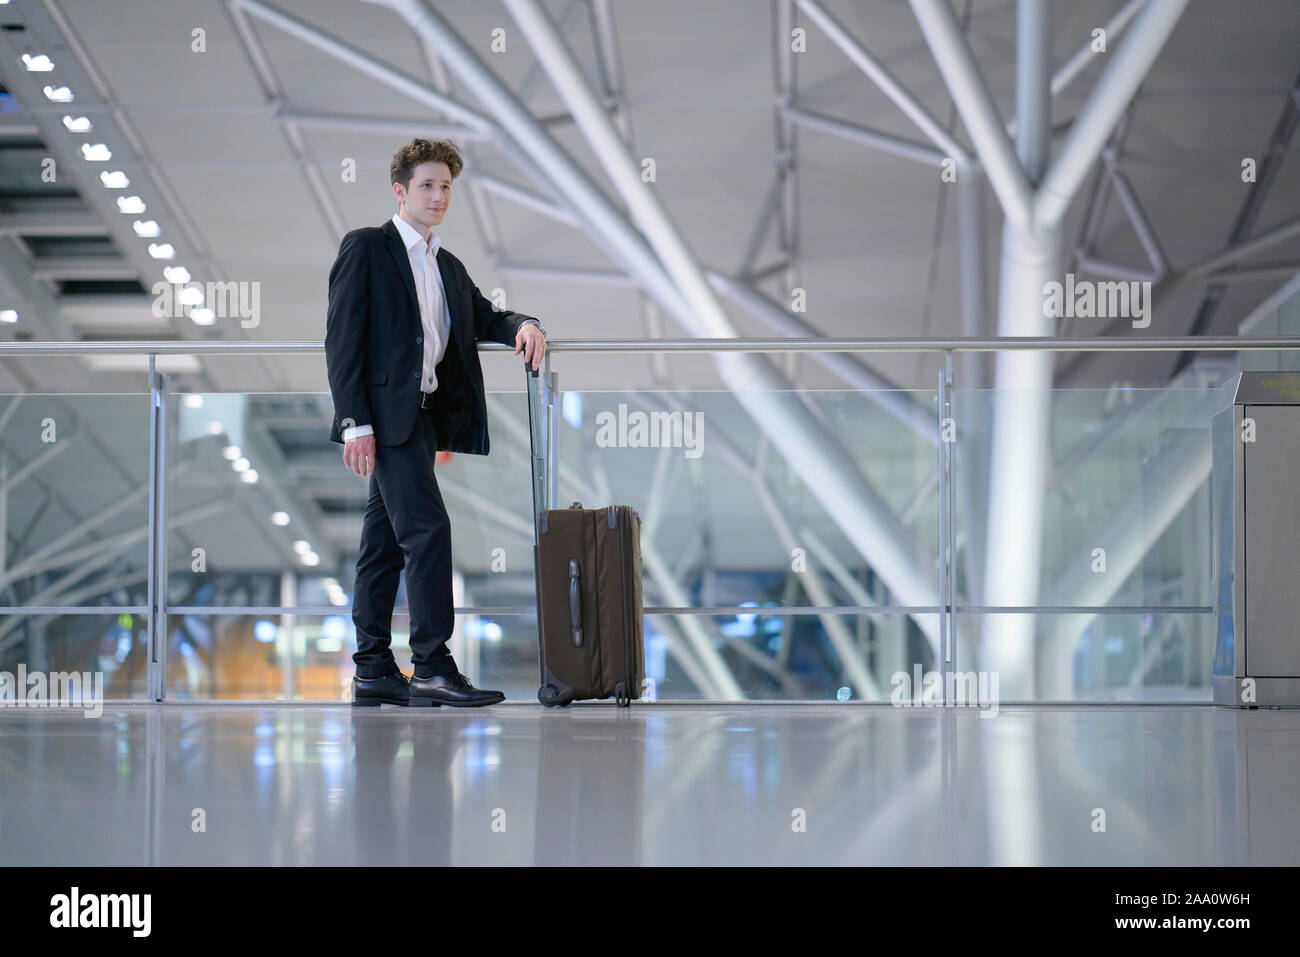 Young relaxed smiling businessman standing with his rolling suitcase in the airport, leaning with his arm on a guard railing Stock Photo